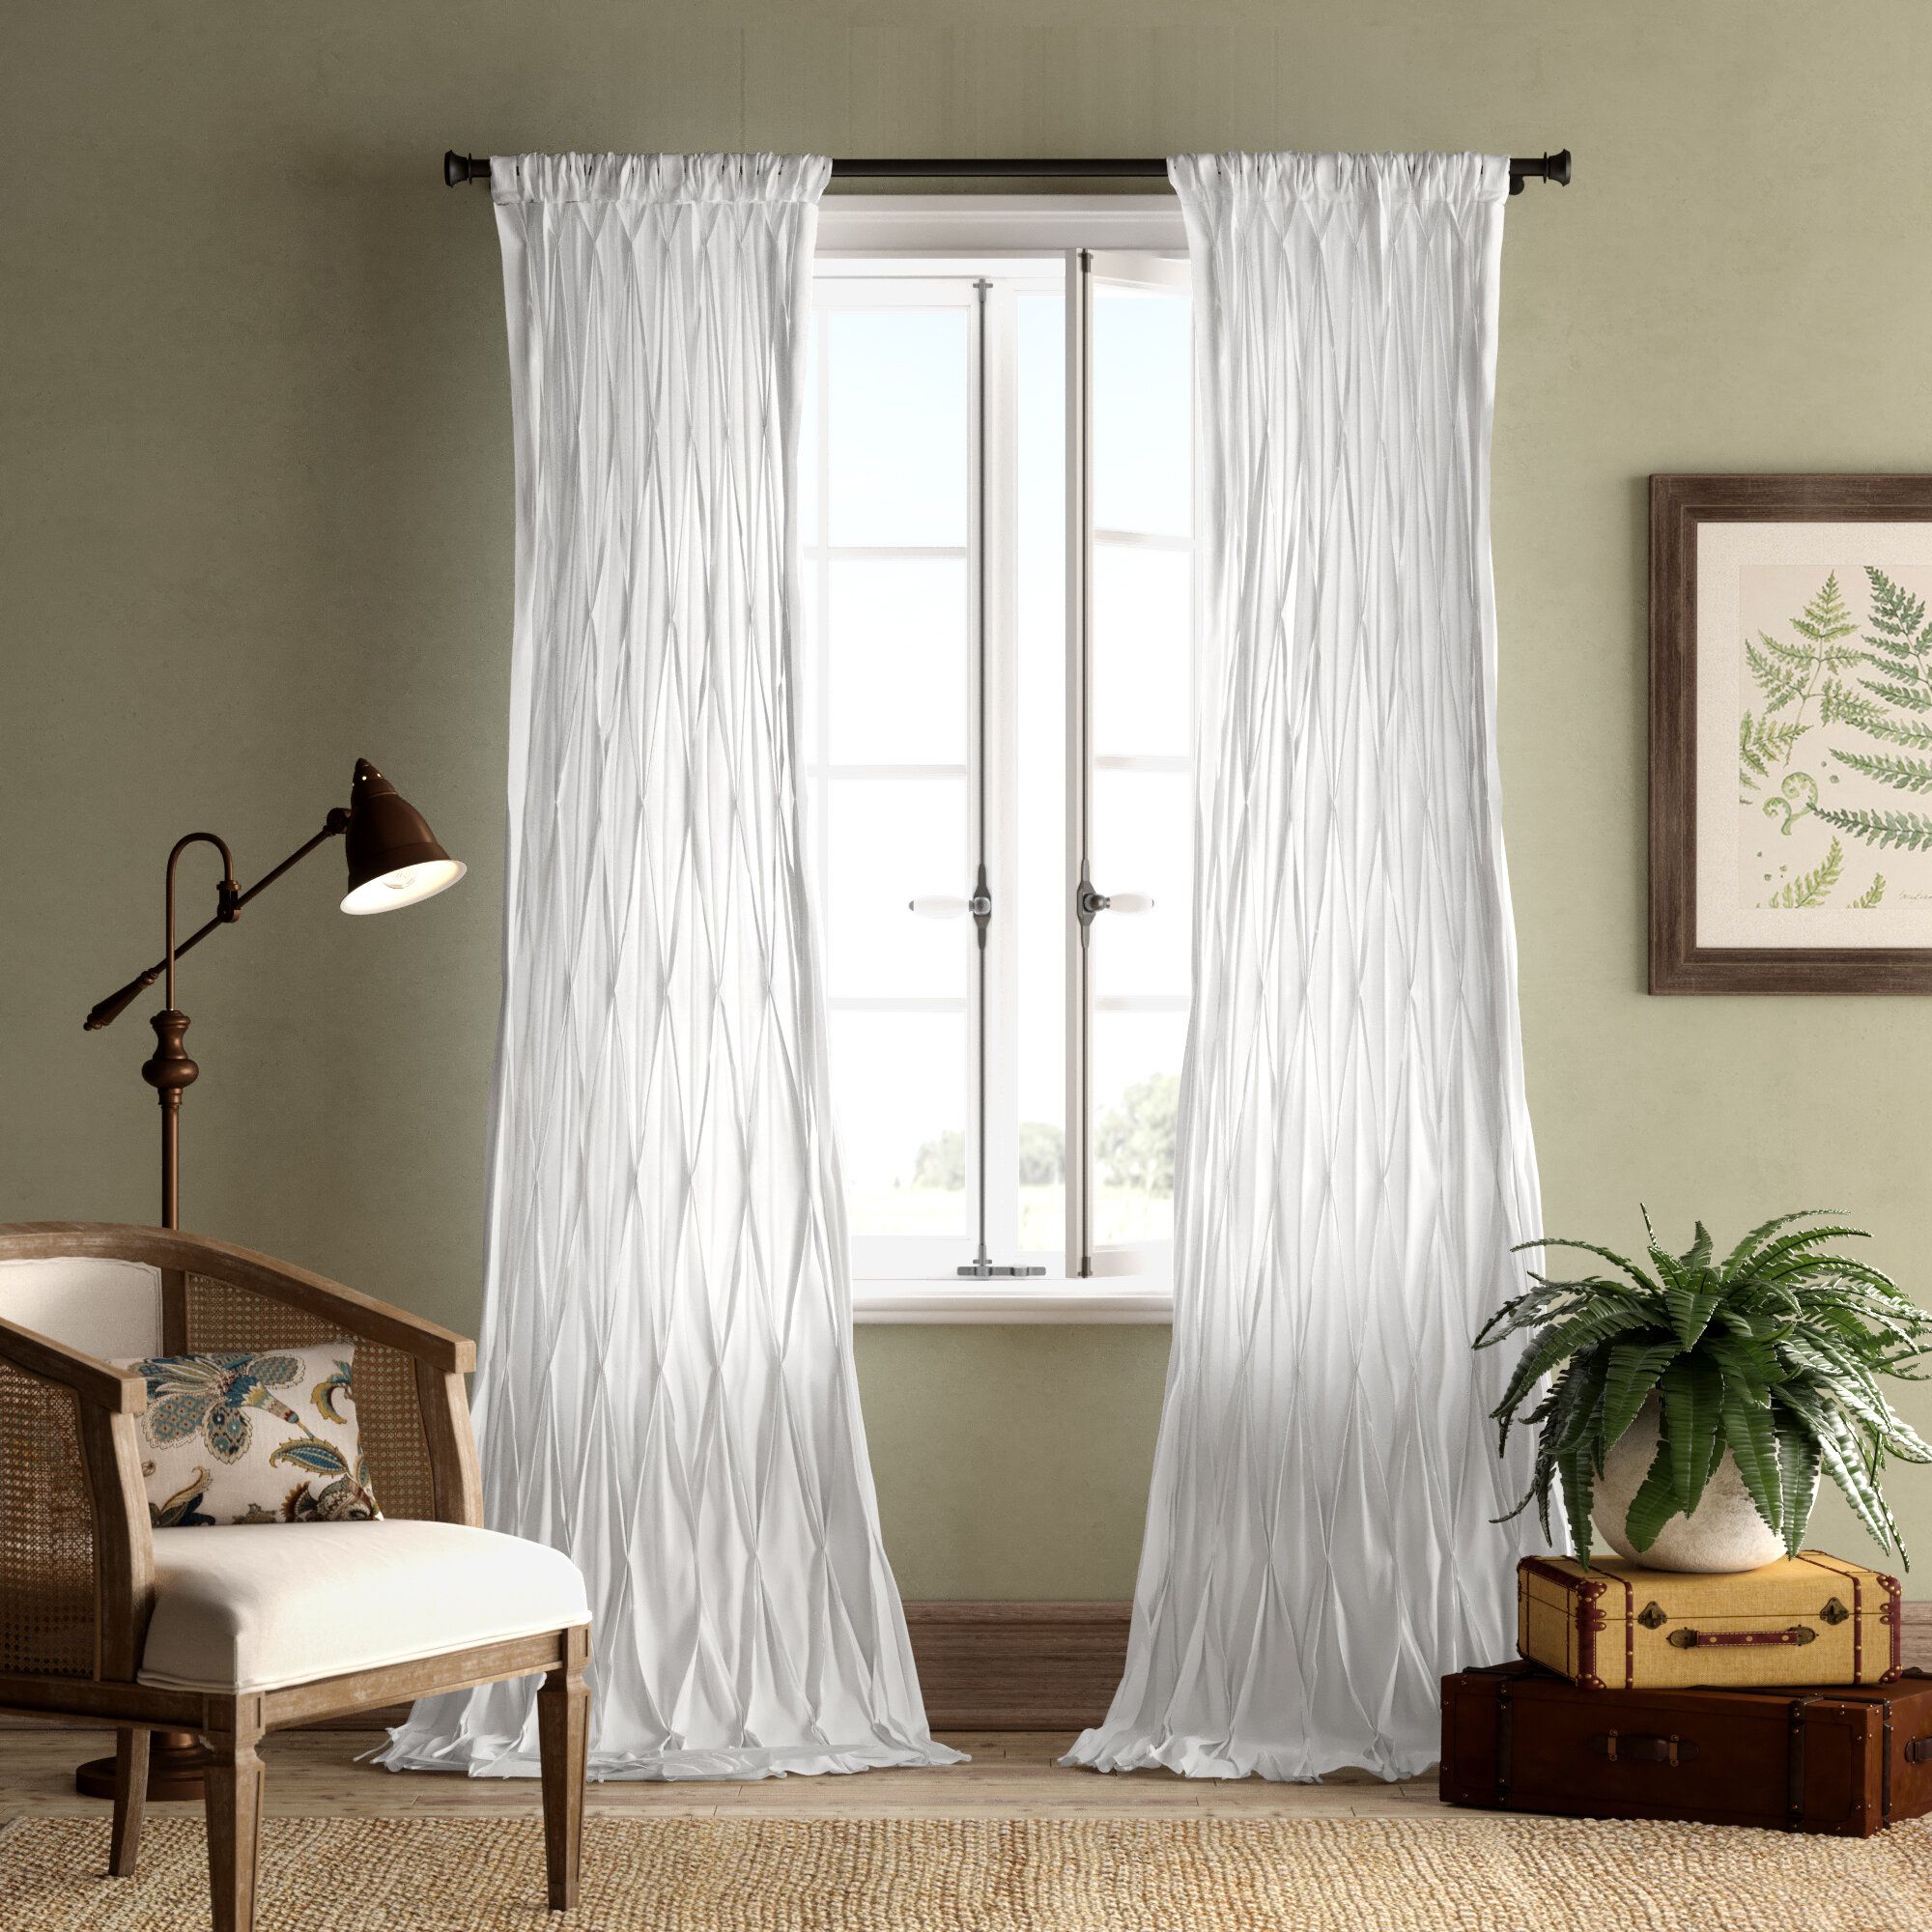 Casimiro Cotton Voile Solid Sheer Pinch Pleat Single Curtain Panel Throughout Solid Cotton Pleated Curtains (View 16 of 30)